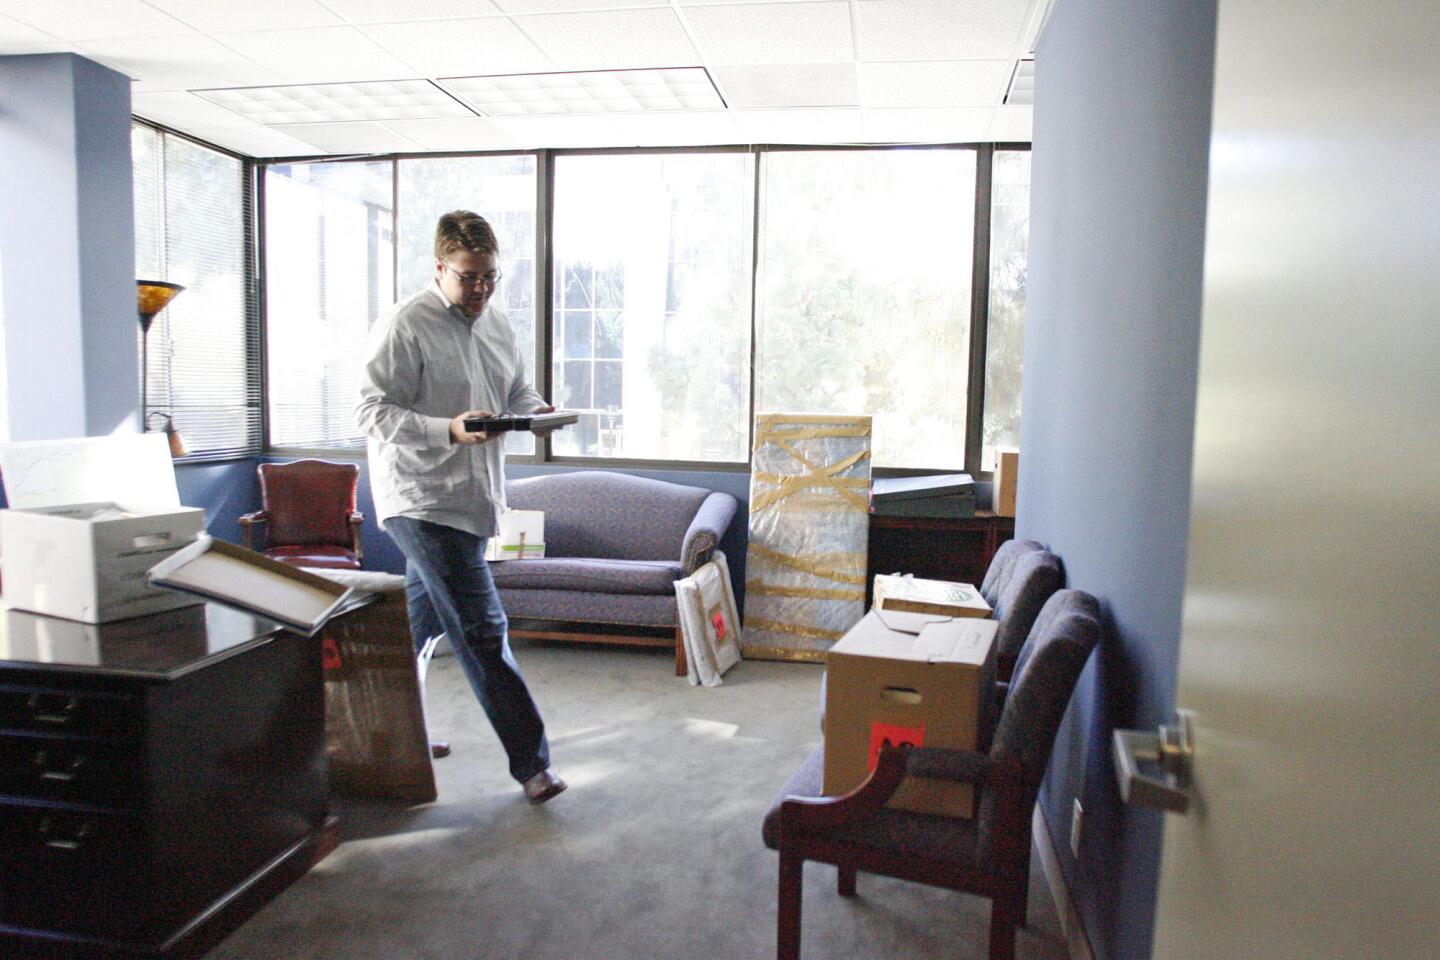 Patrick Boland helps unpack boxes in the new office for Rep. Adam Schiff in Burbank on Thursday, December 27, 2012.